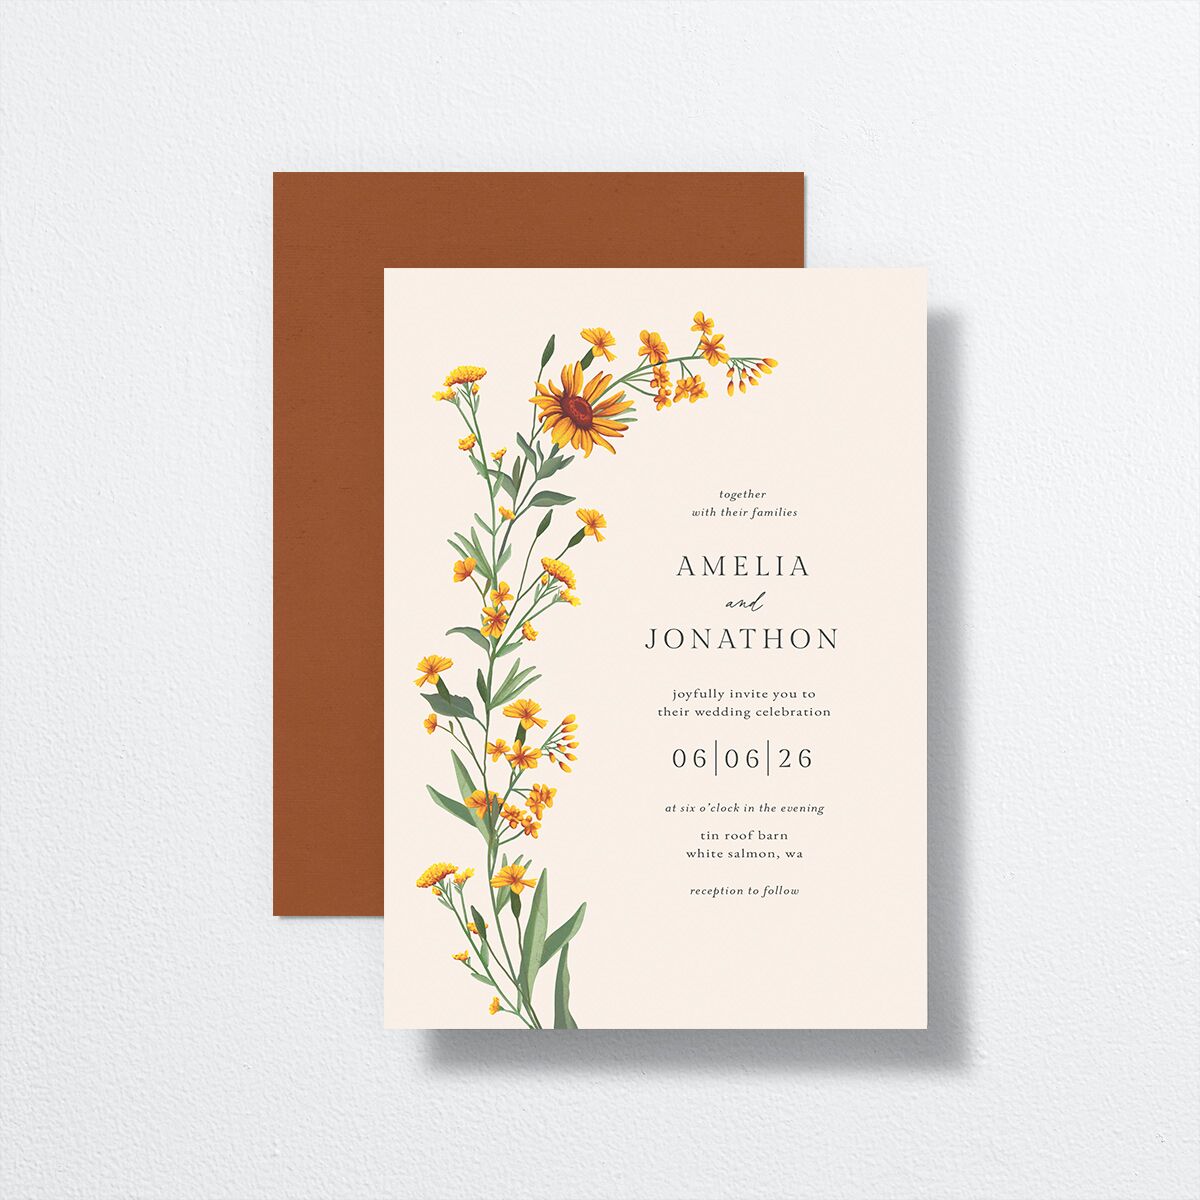 Wild Daisies Wedding Invitations front-and-back